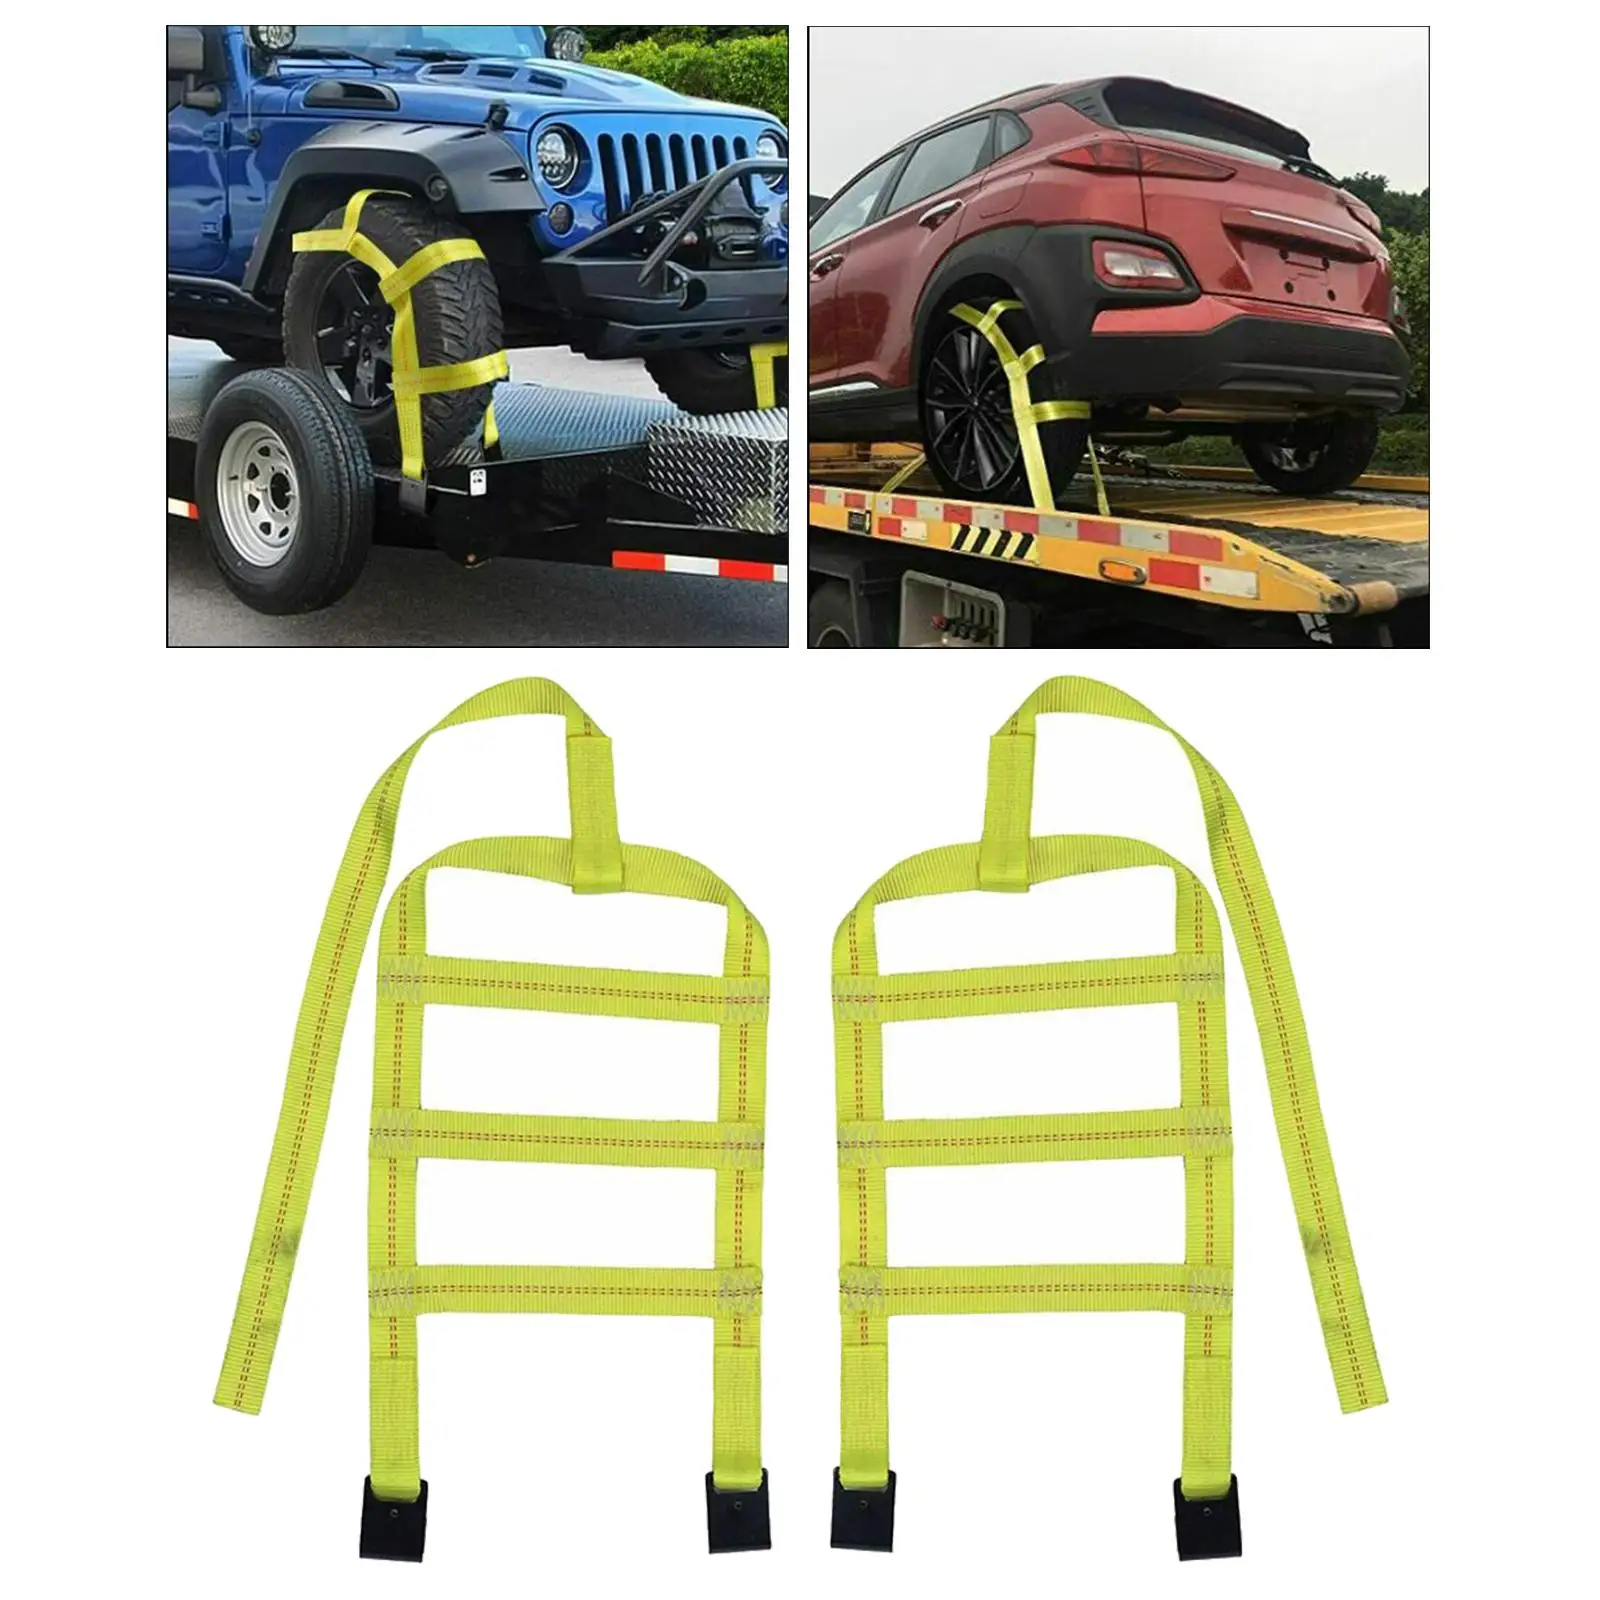 Tow Straps Basket Adjustable Fits for 14-17inch Tires